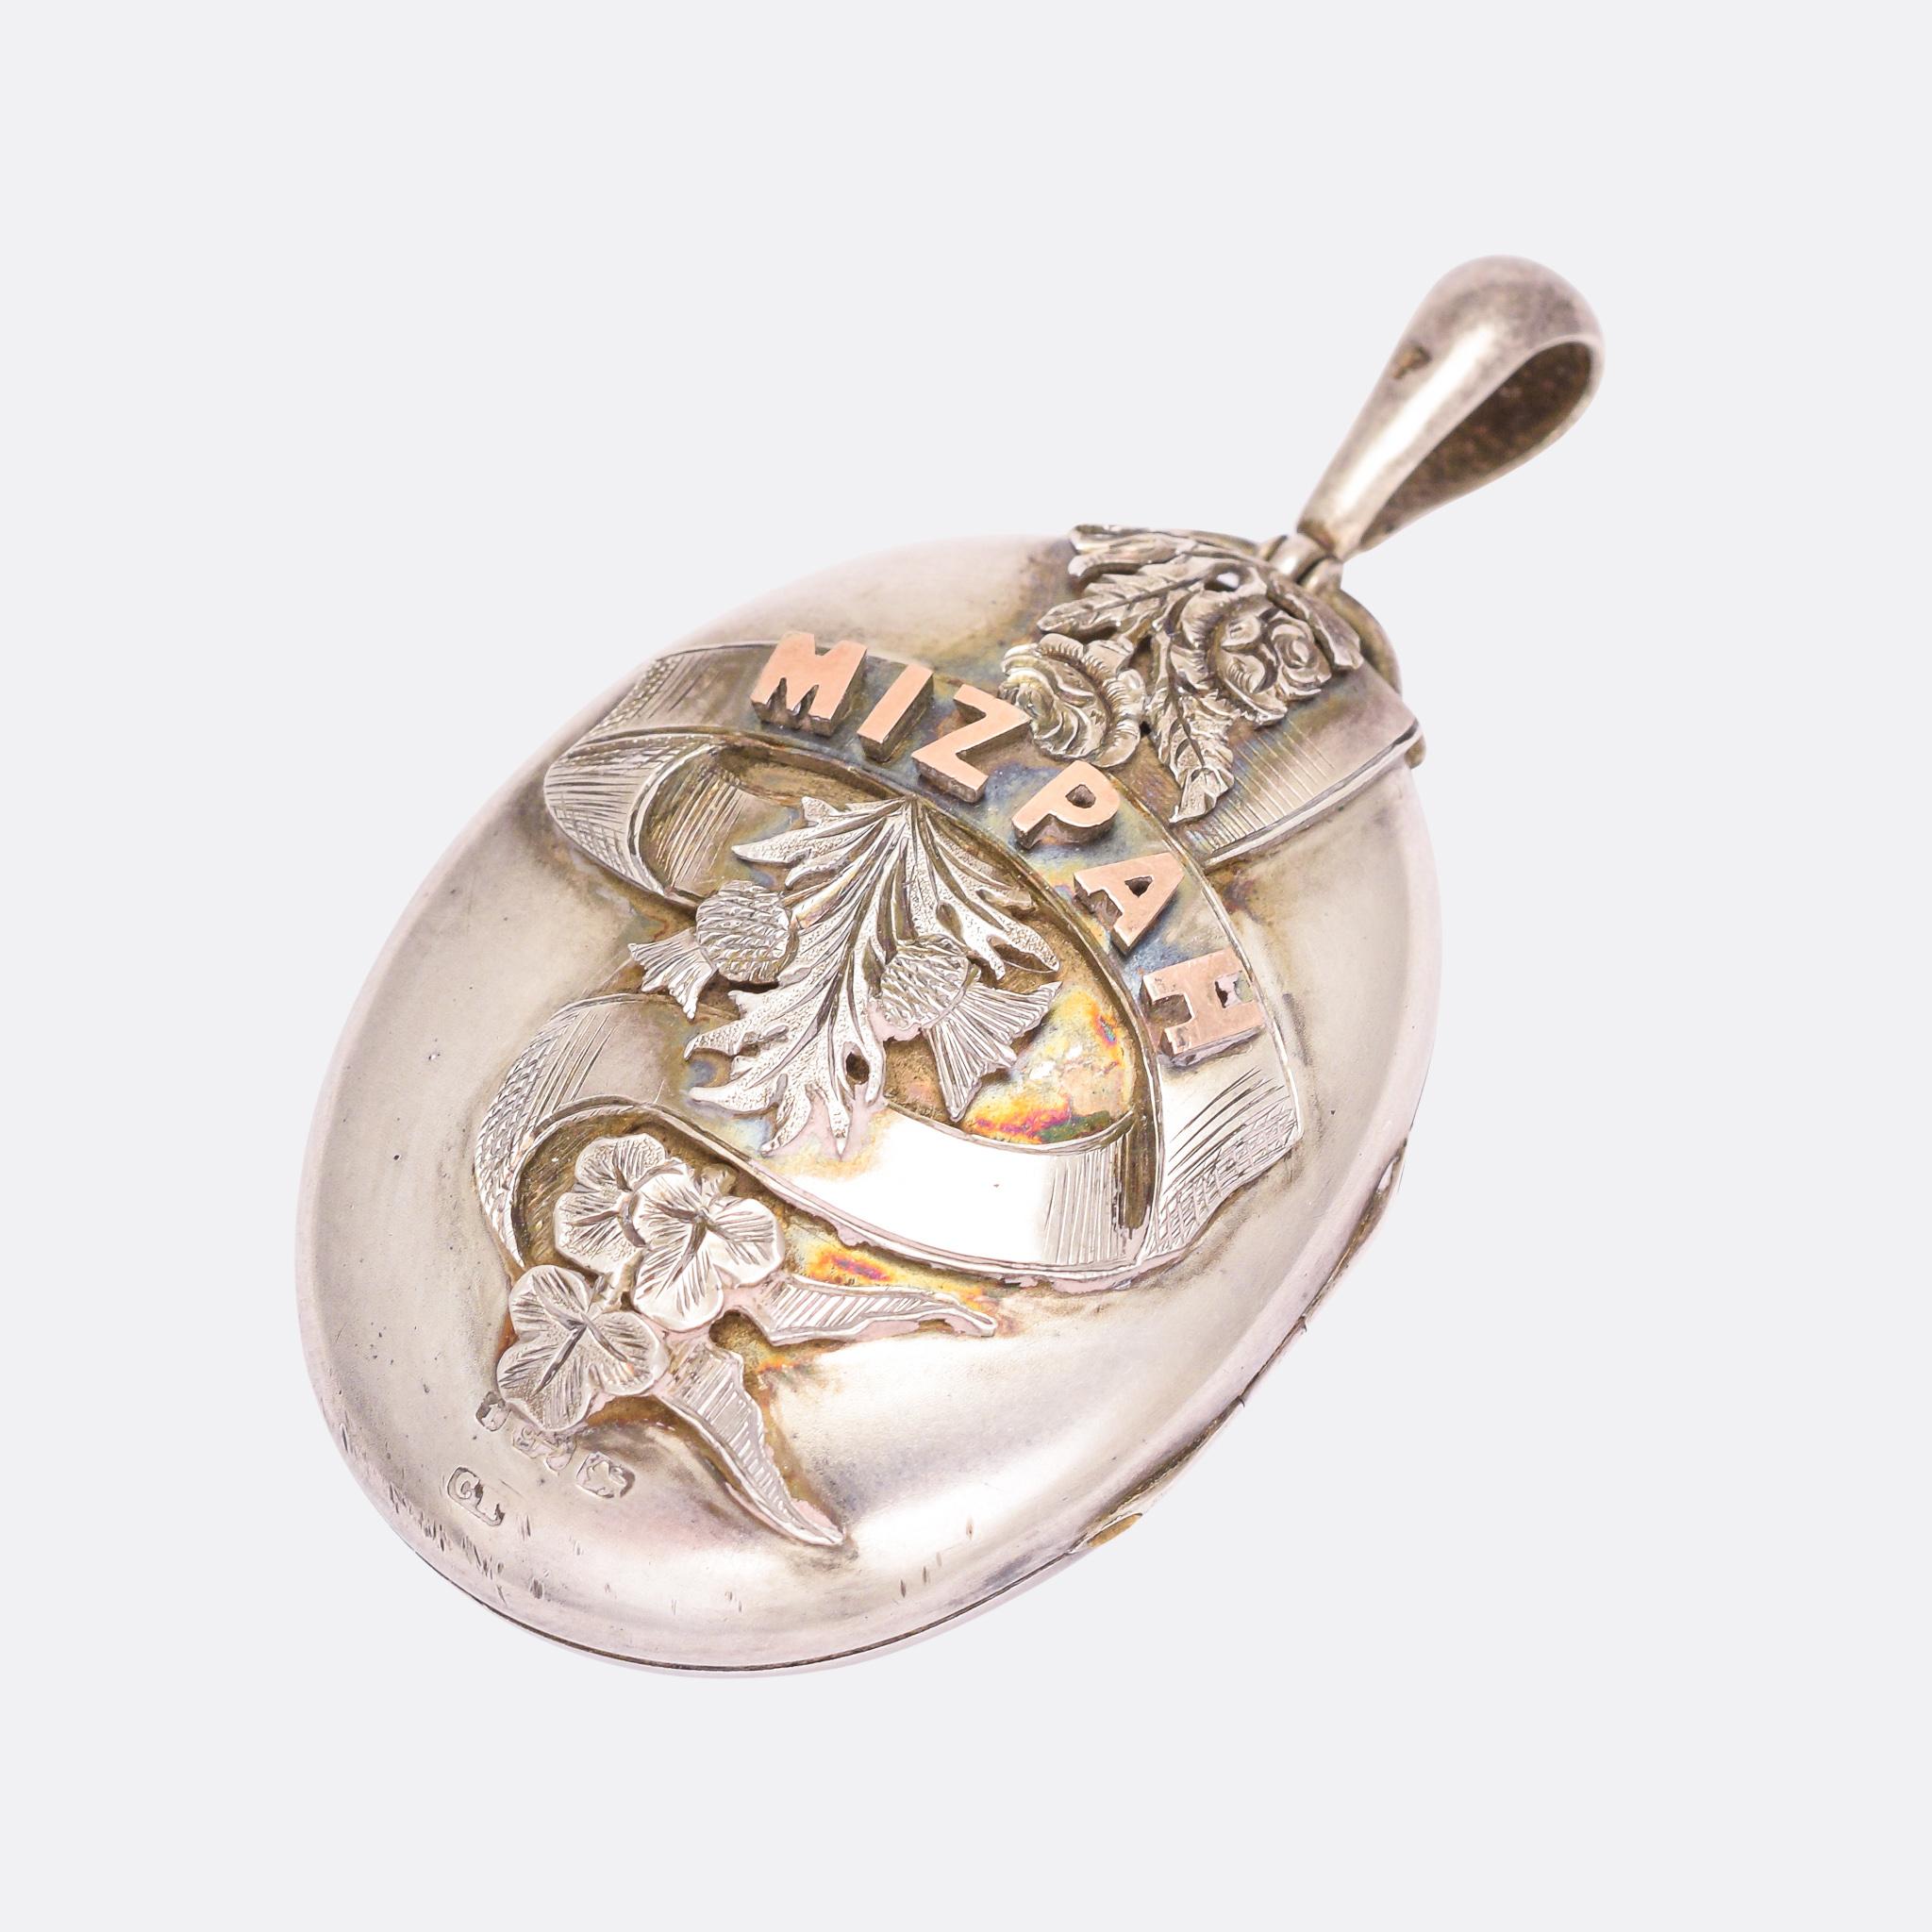 An unusual larger scale MIZPAH locket with a 